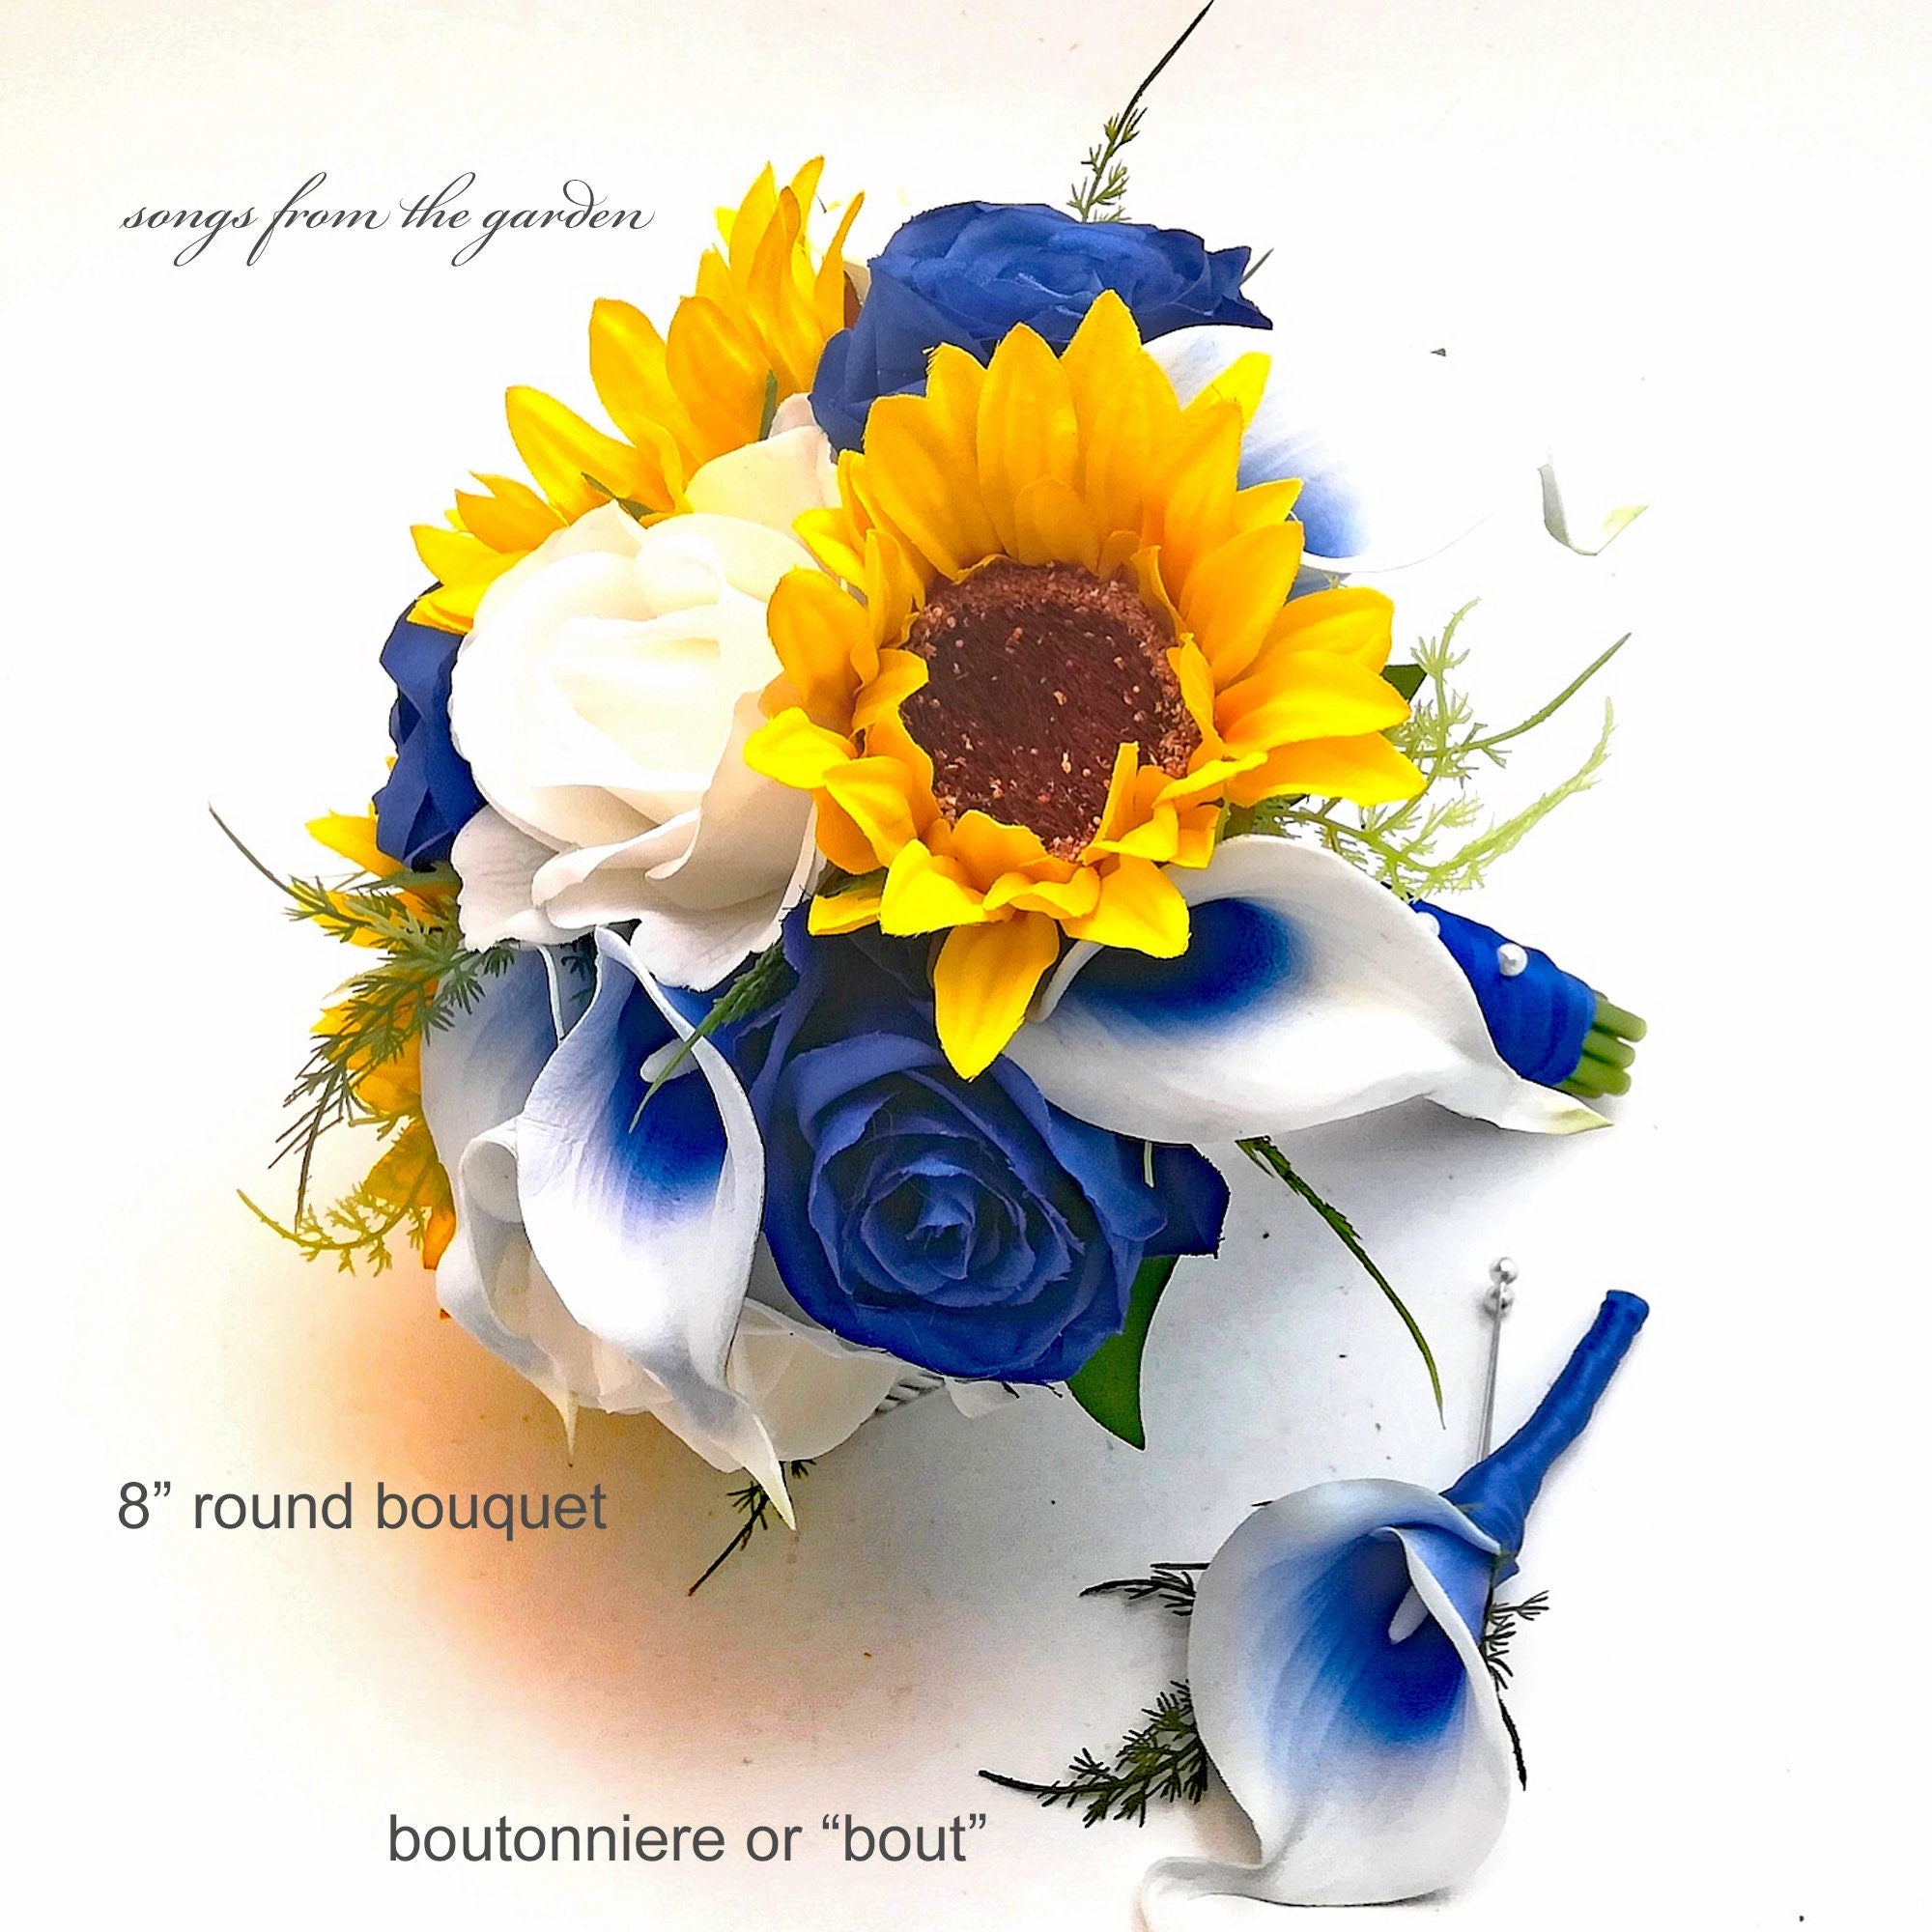 Cascade Bridal Bouquet Sunflowers Royal Blue White Silver - Real Touch Royal Blue Roses and Rhinestones - Add Groom's Boutonniere Bridesmaid